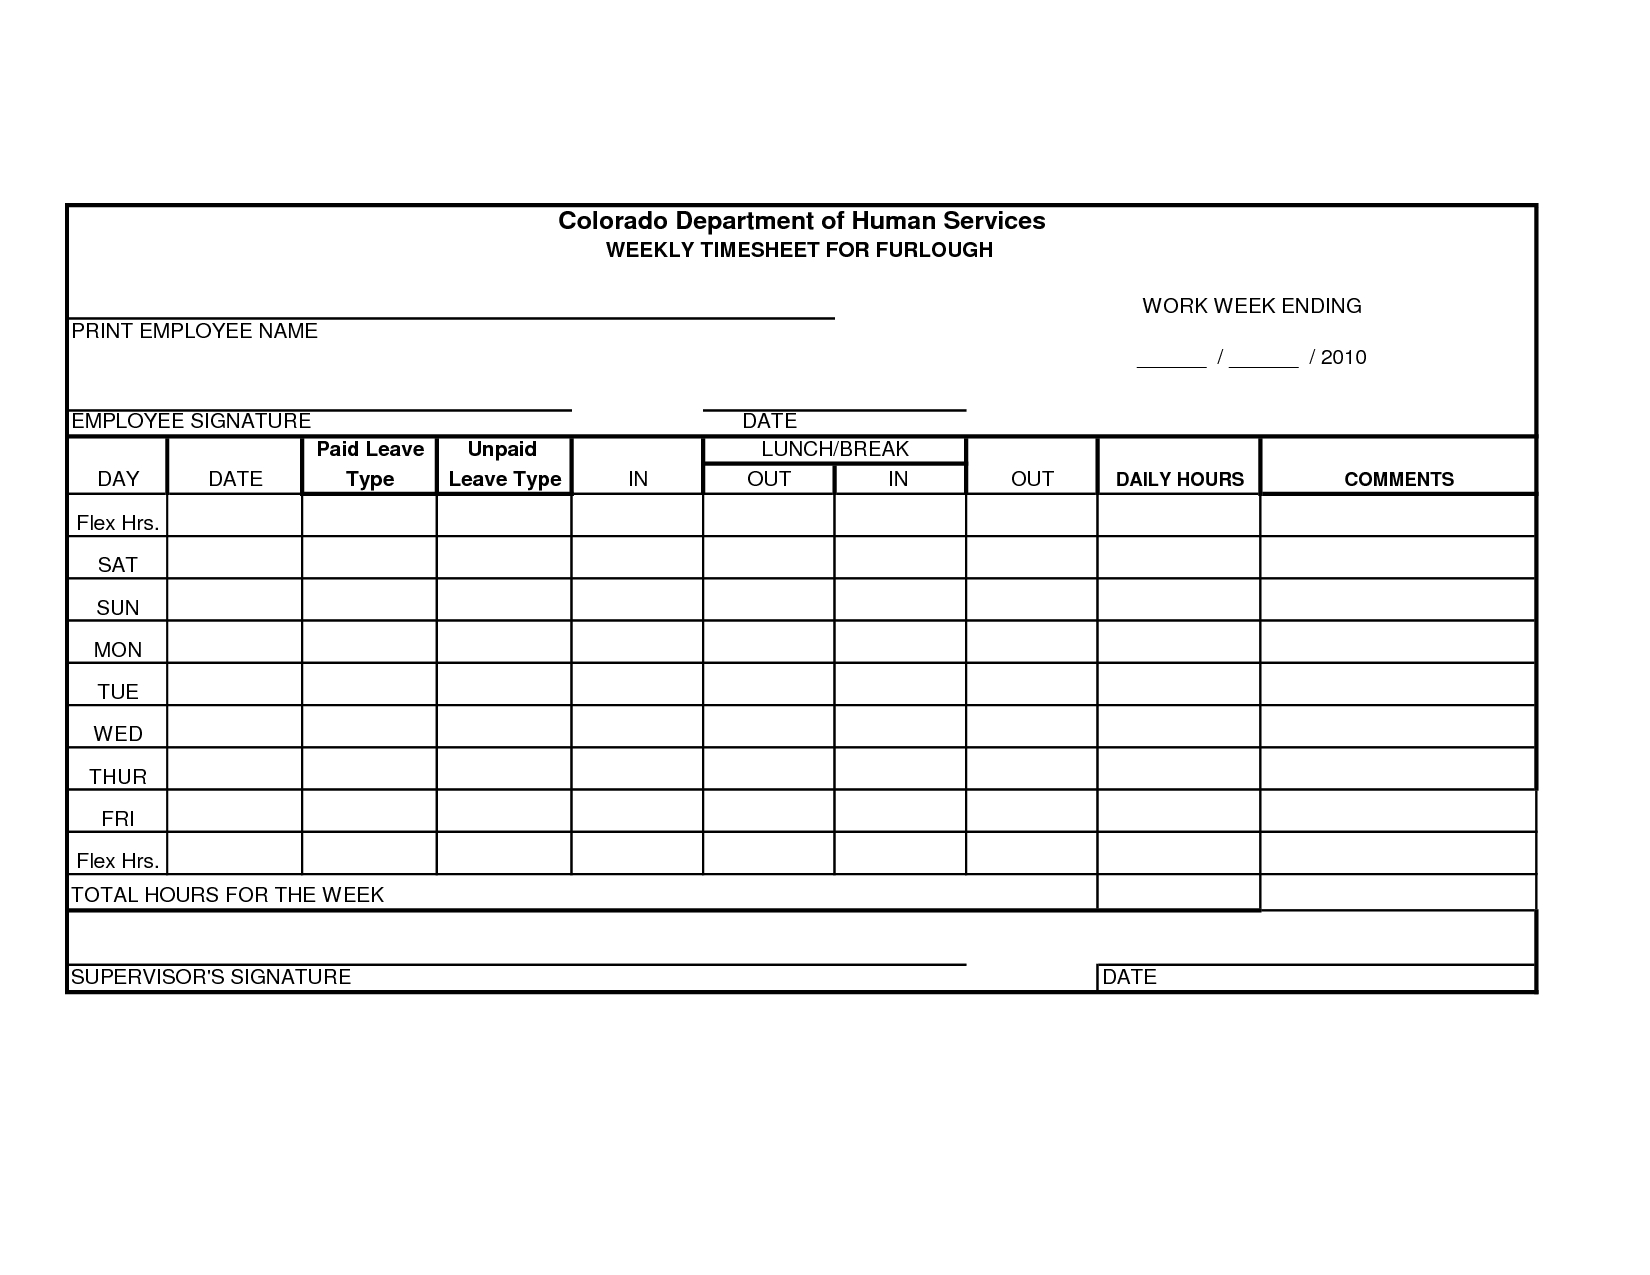 Free Printable Time Sheets Forms | Furlough Weekly Time Sheet - Timesheet Template Free Printable